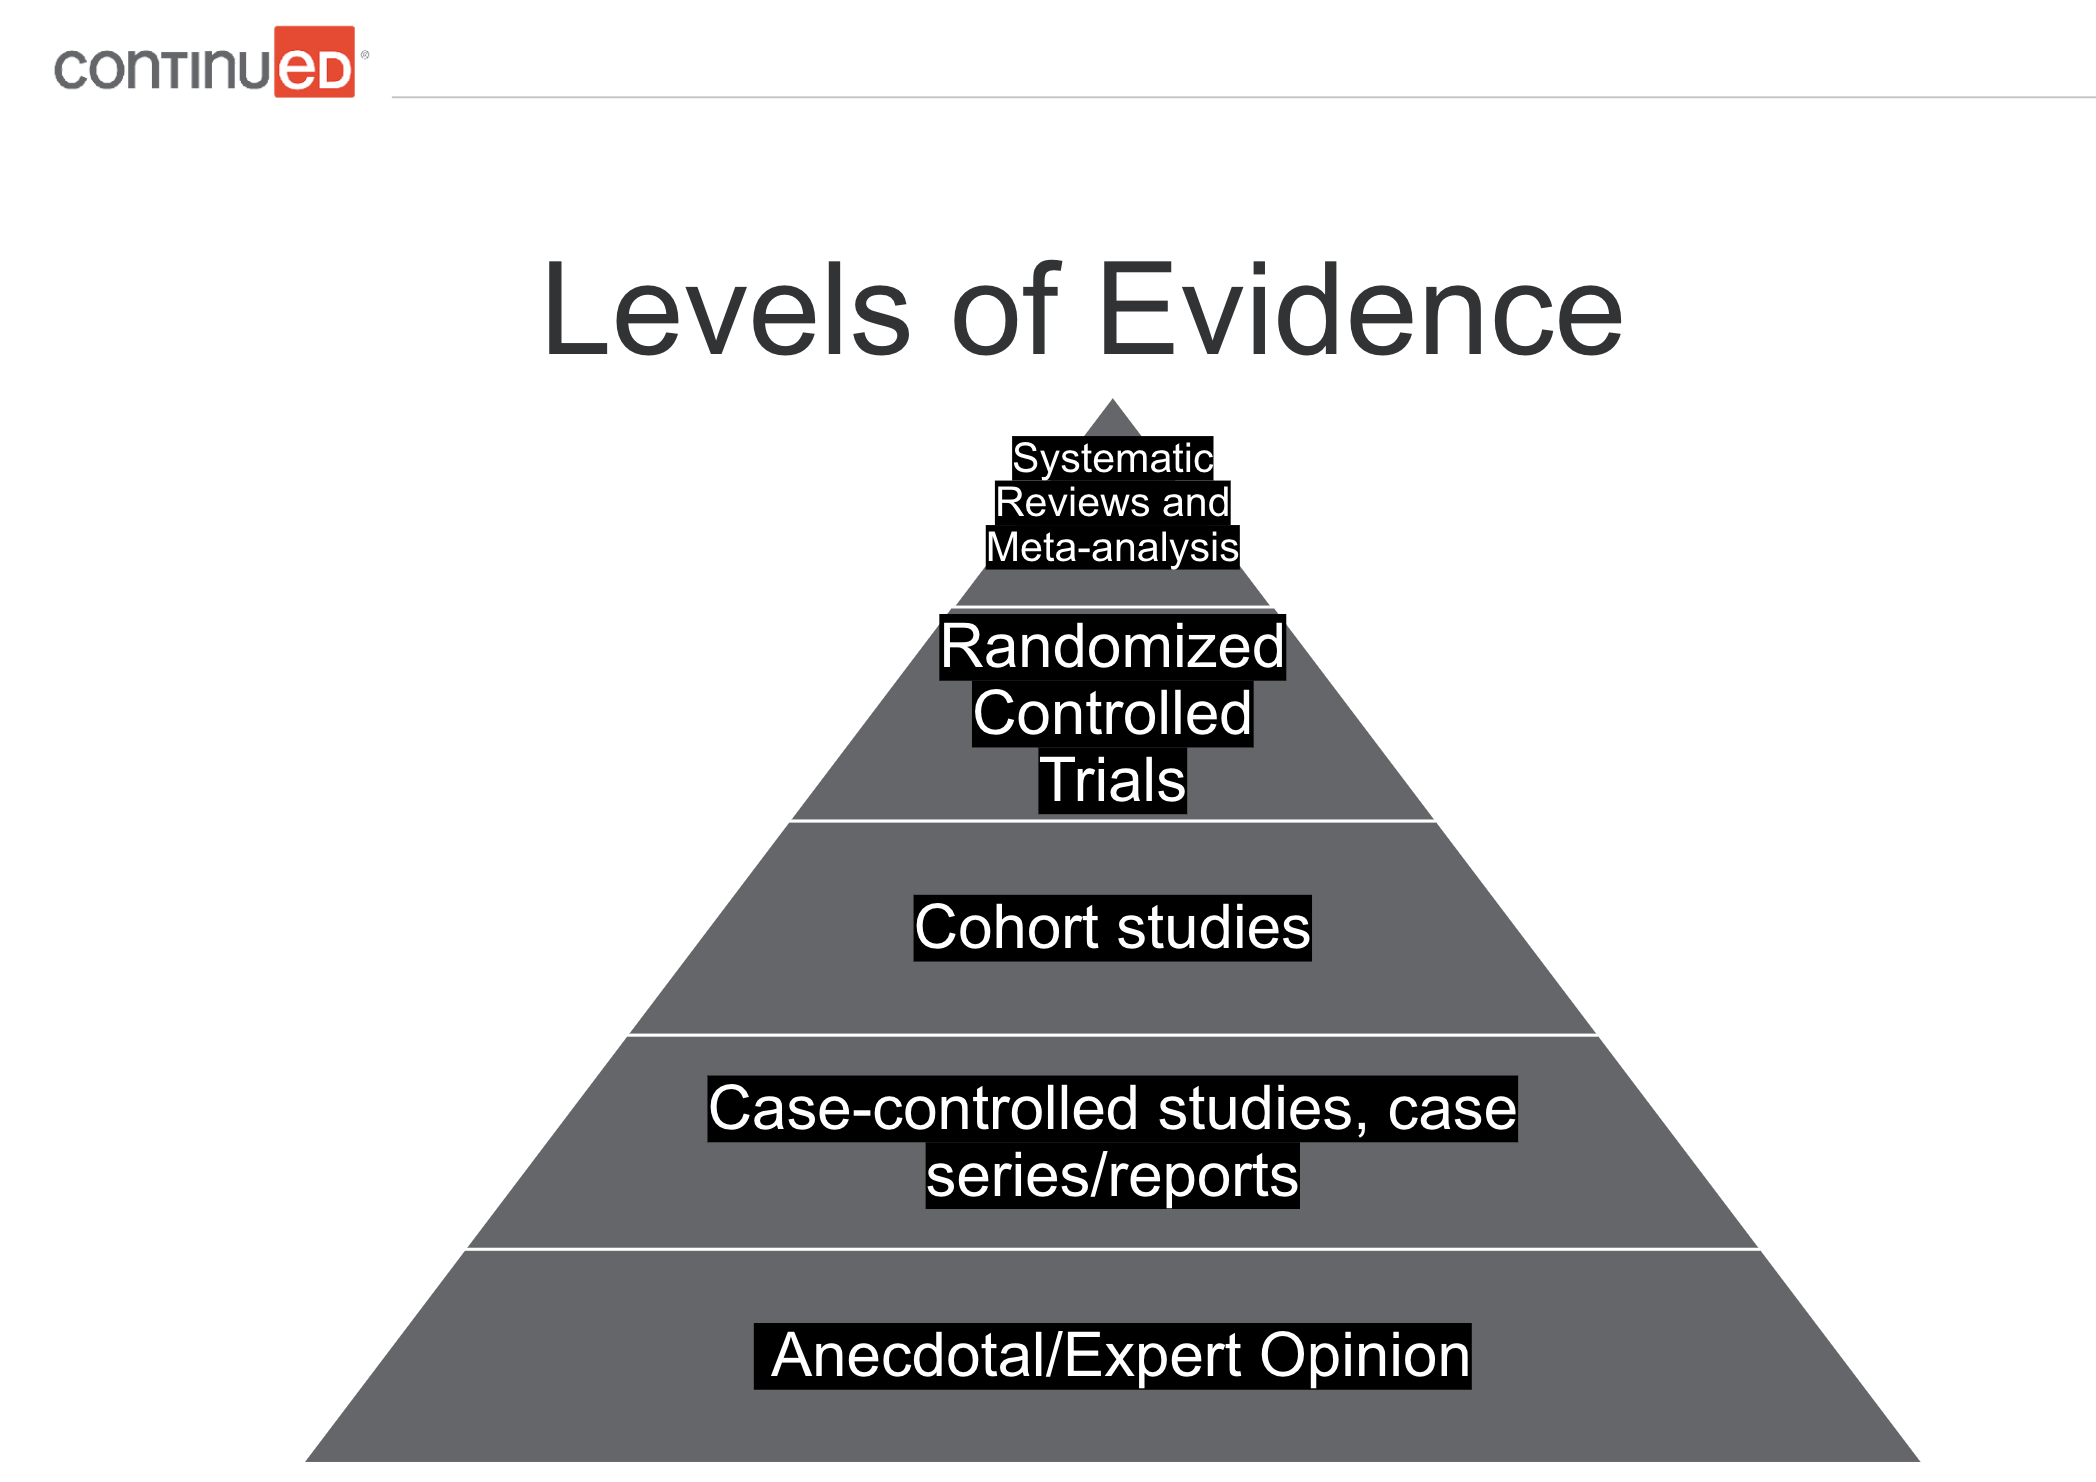 Levels of evidence pyramid with systematic reviews and meta-analysis at the top, and anecdotal/expert opinion at the bottom.